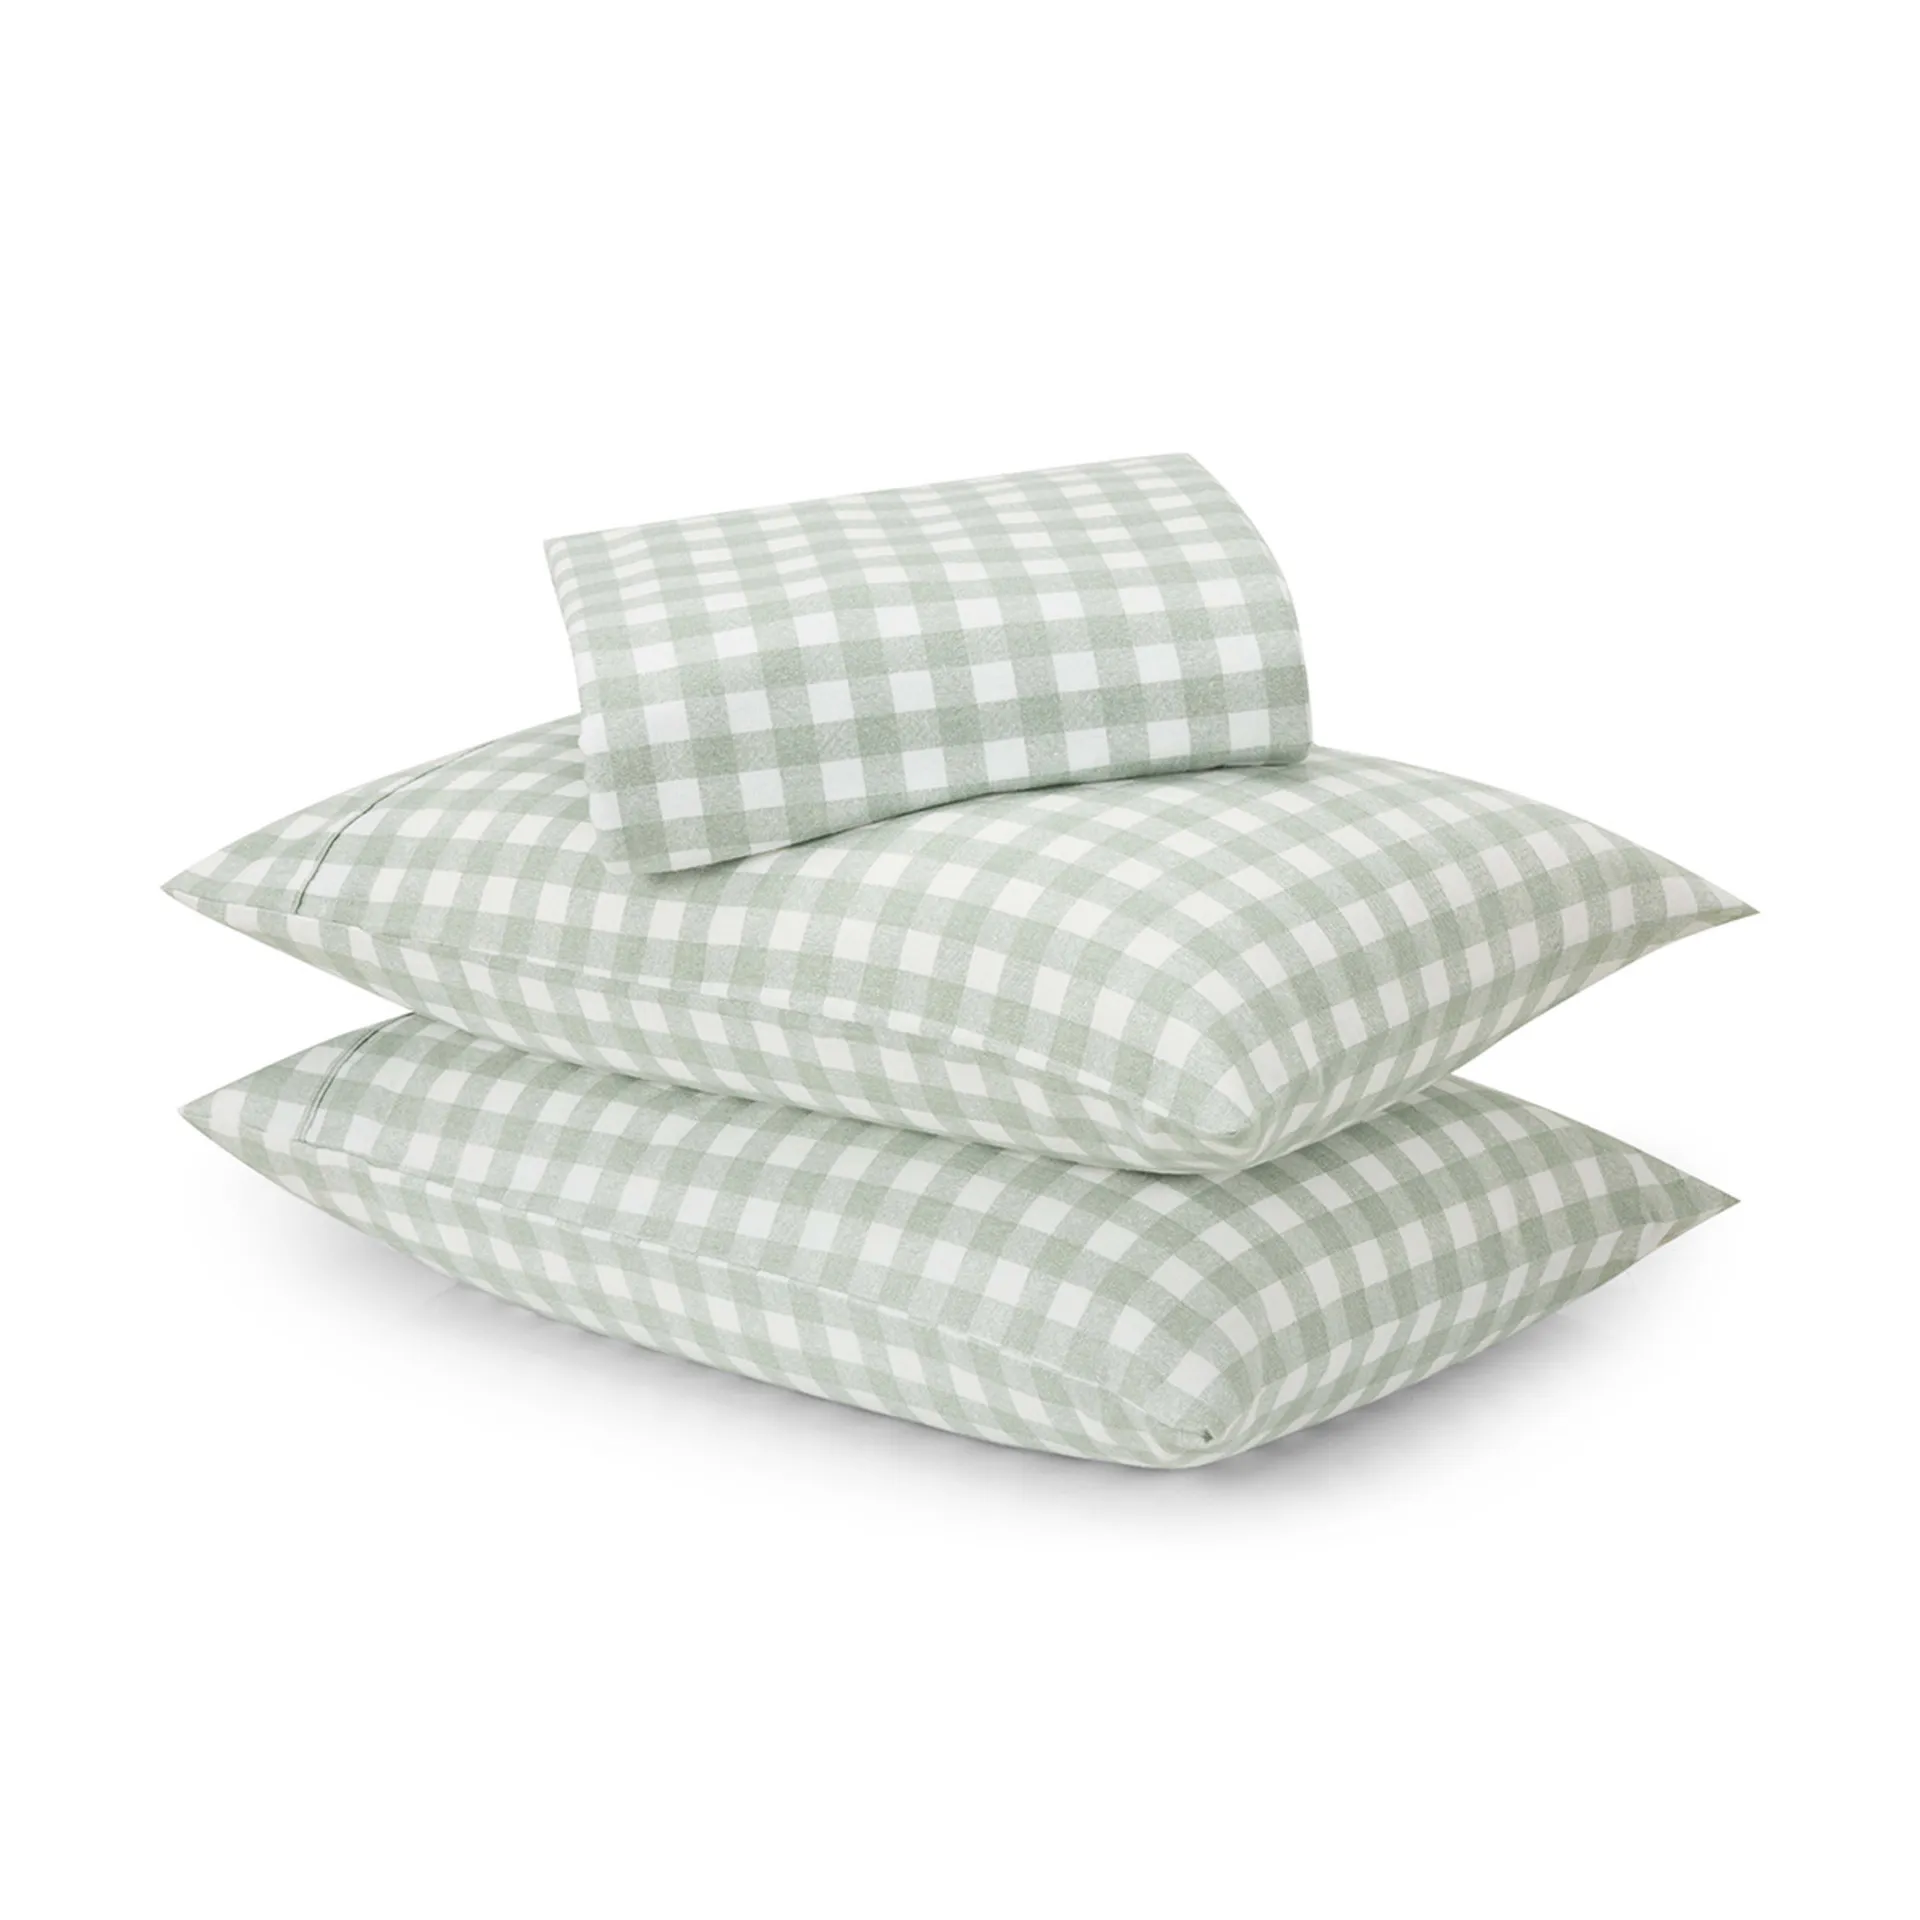 Gingham Cotton Flannelette Sheet Set - Double Bed, Green